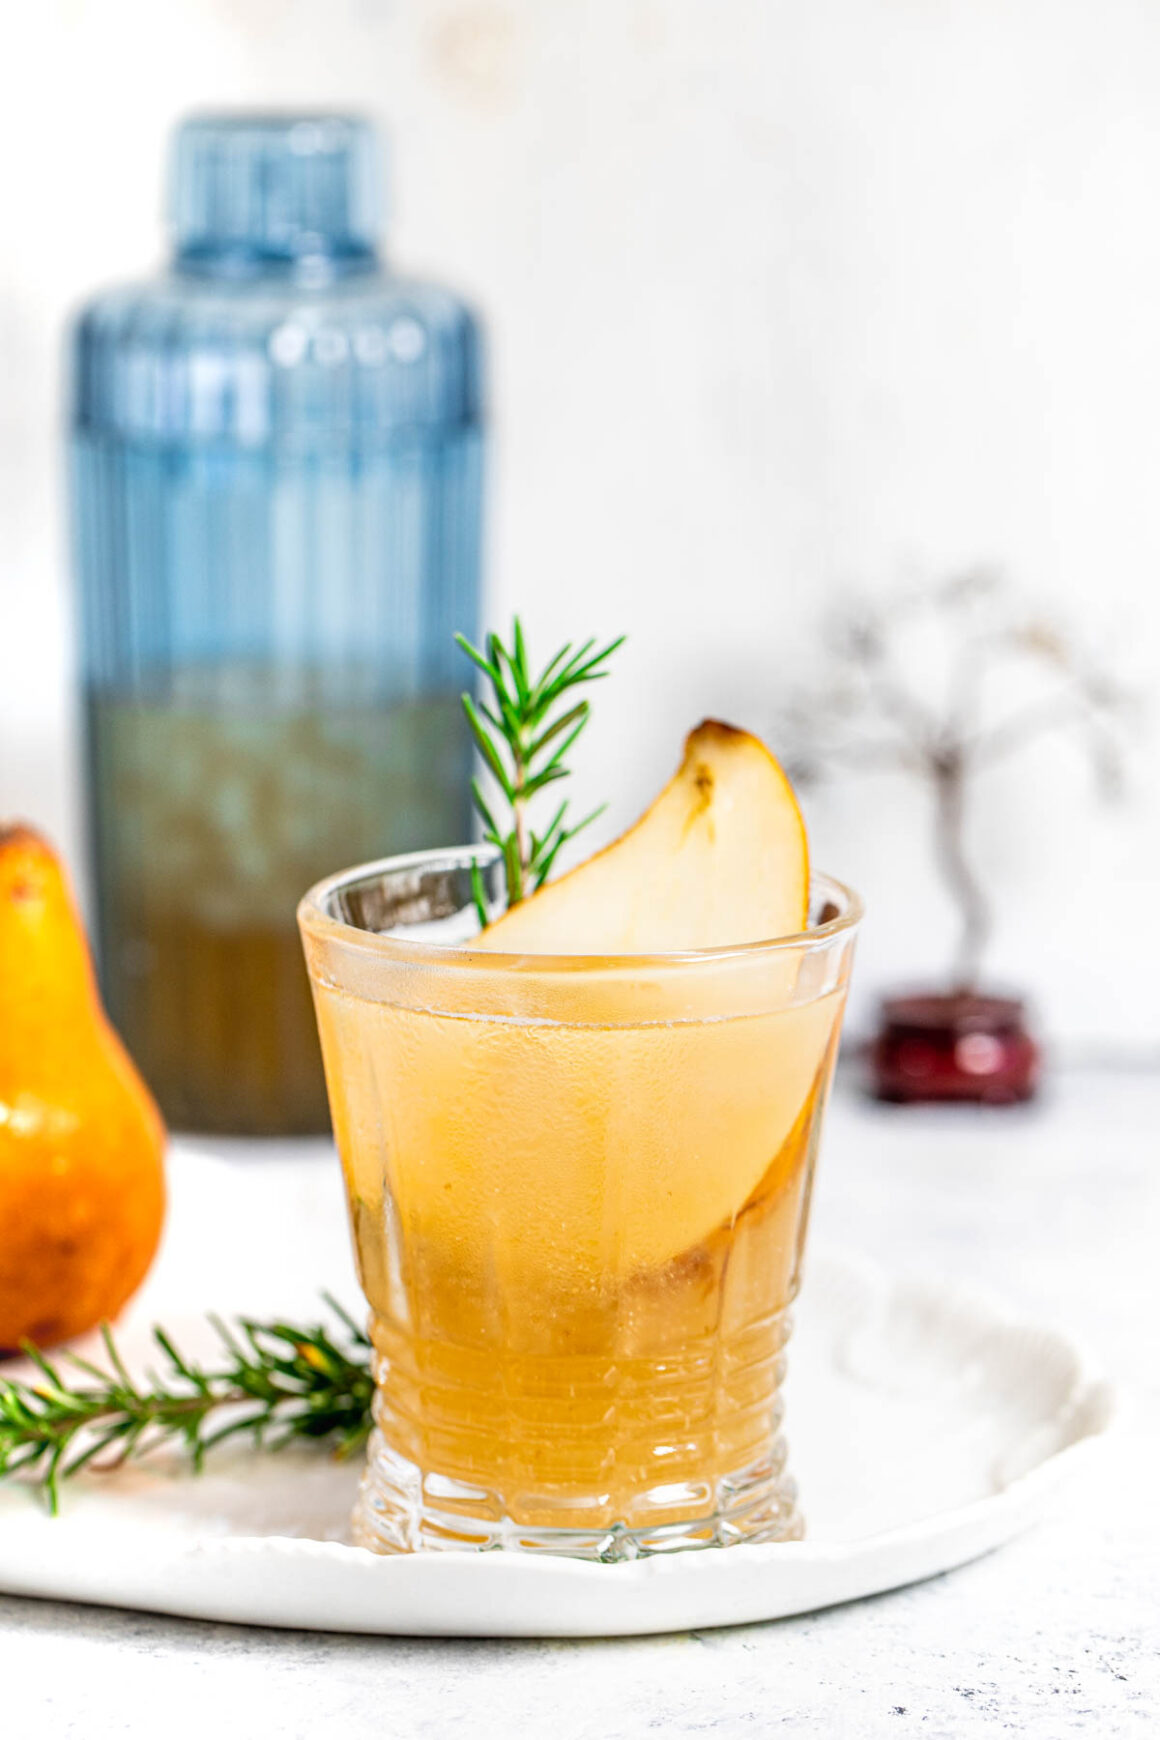 Indulge in the crisp and delicate flavors of a Pear Gin cocktail.